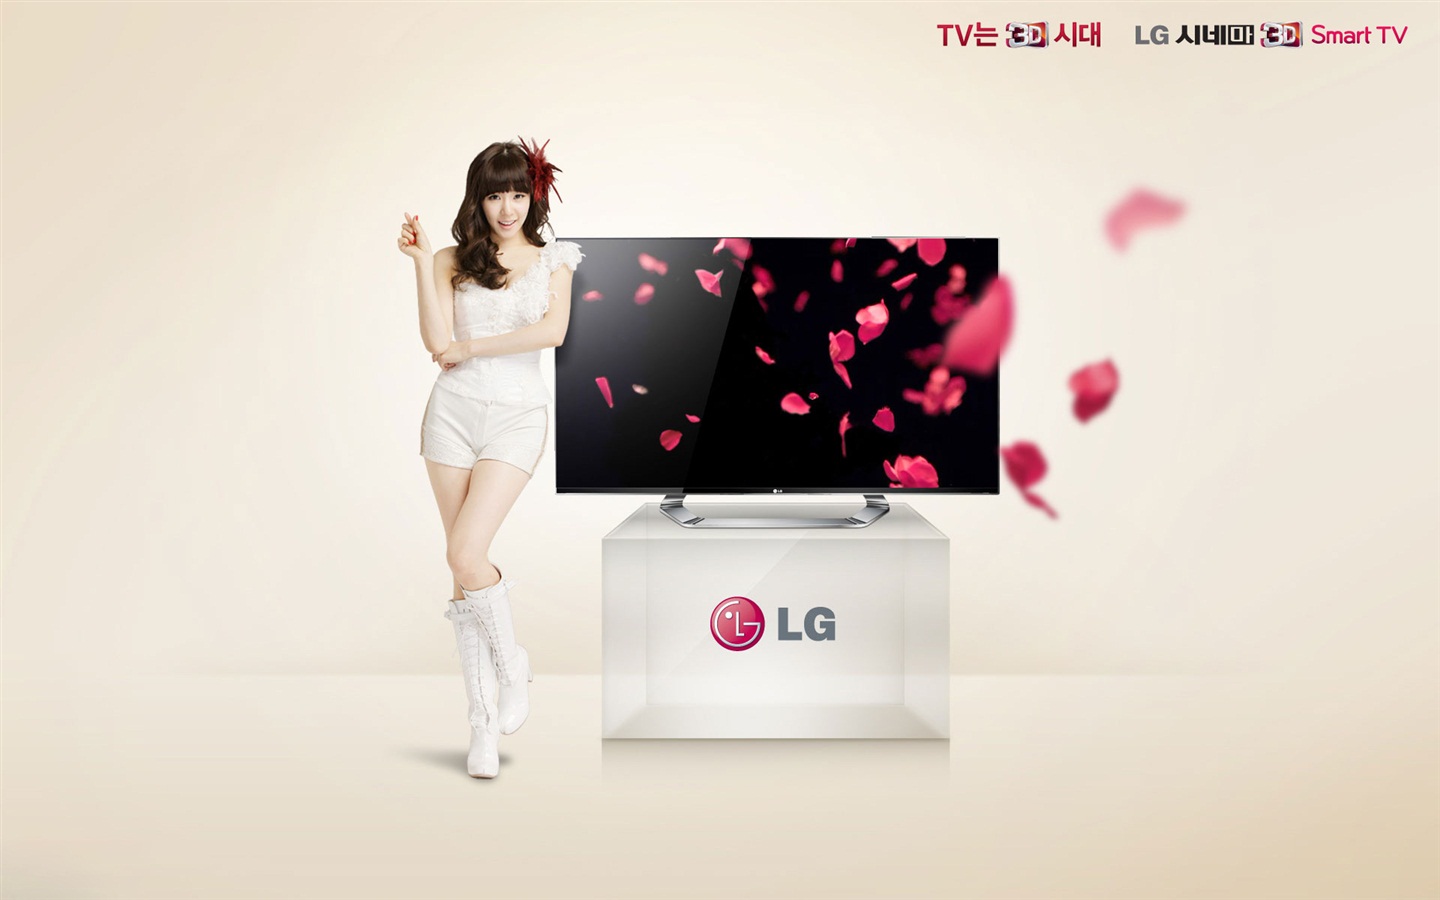 Girls Generation ACE and LG endorsements ads HD wallpapers #15 - 1440x900